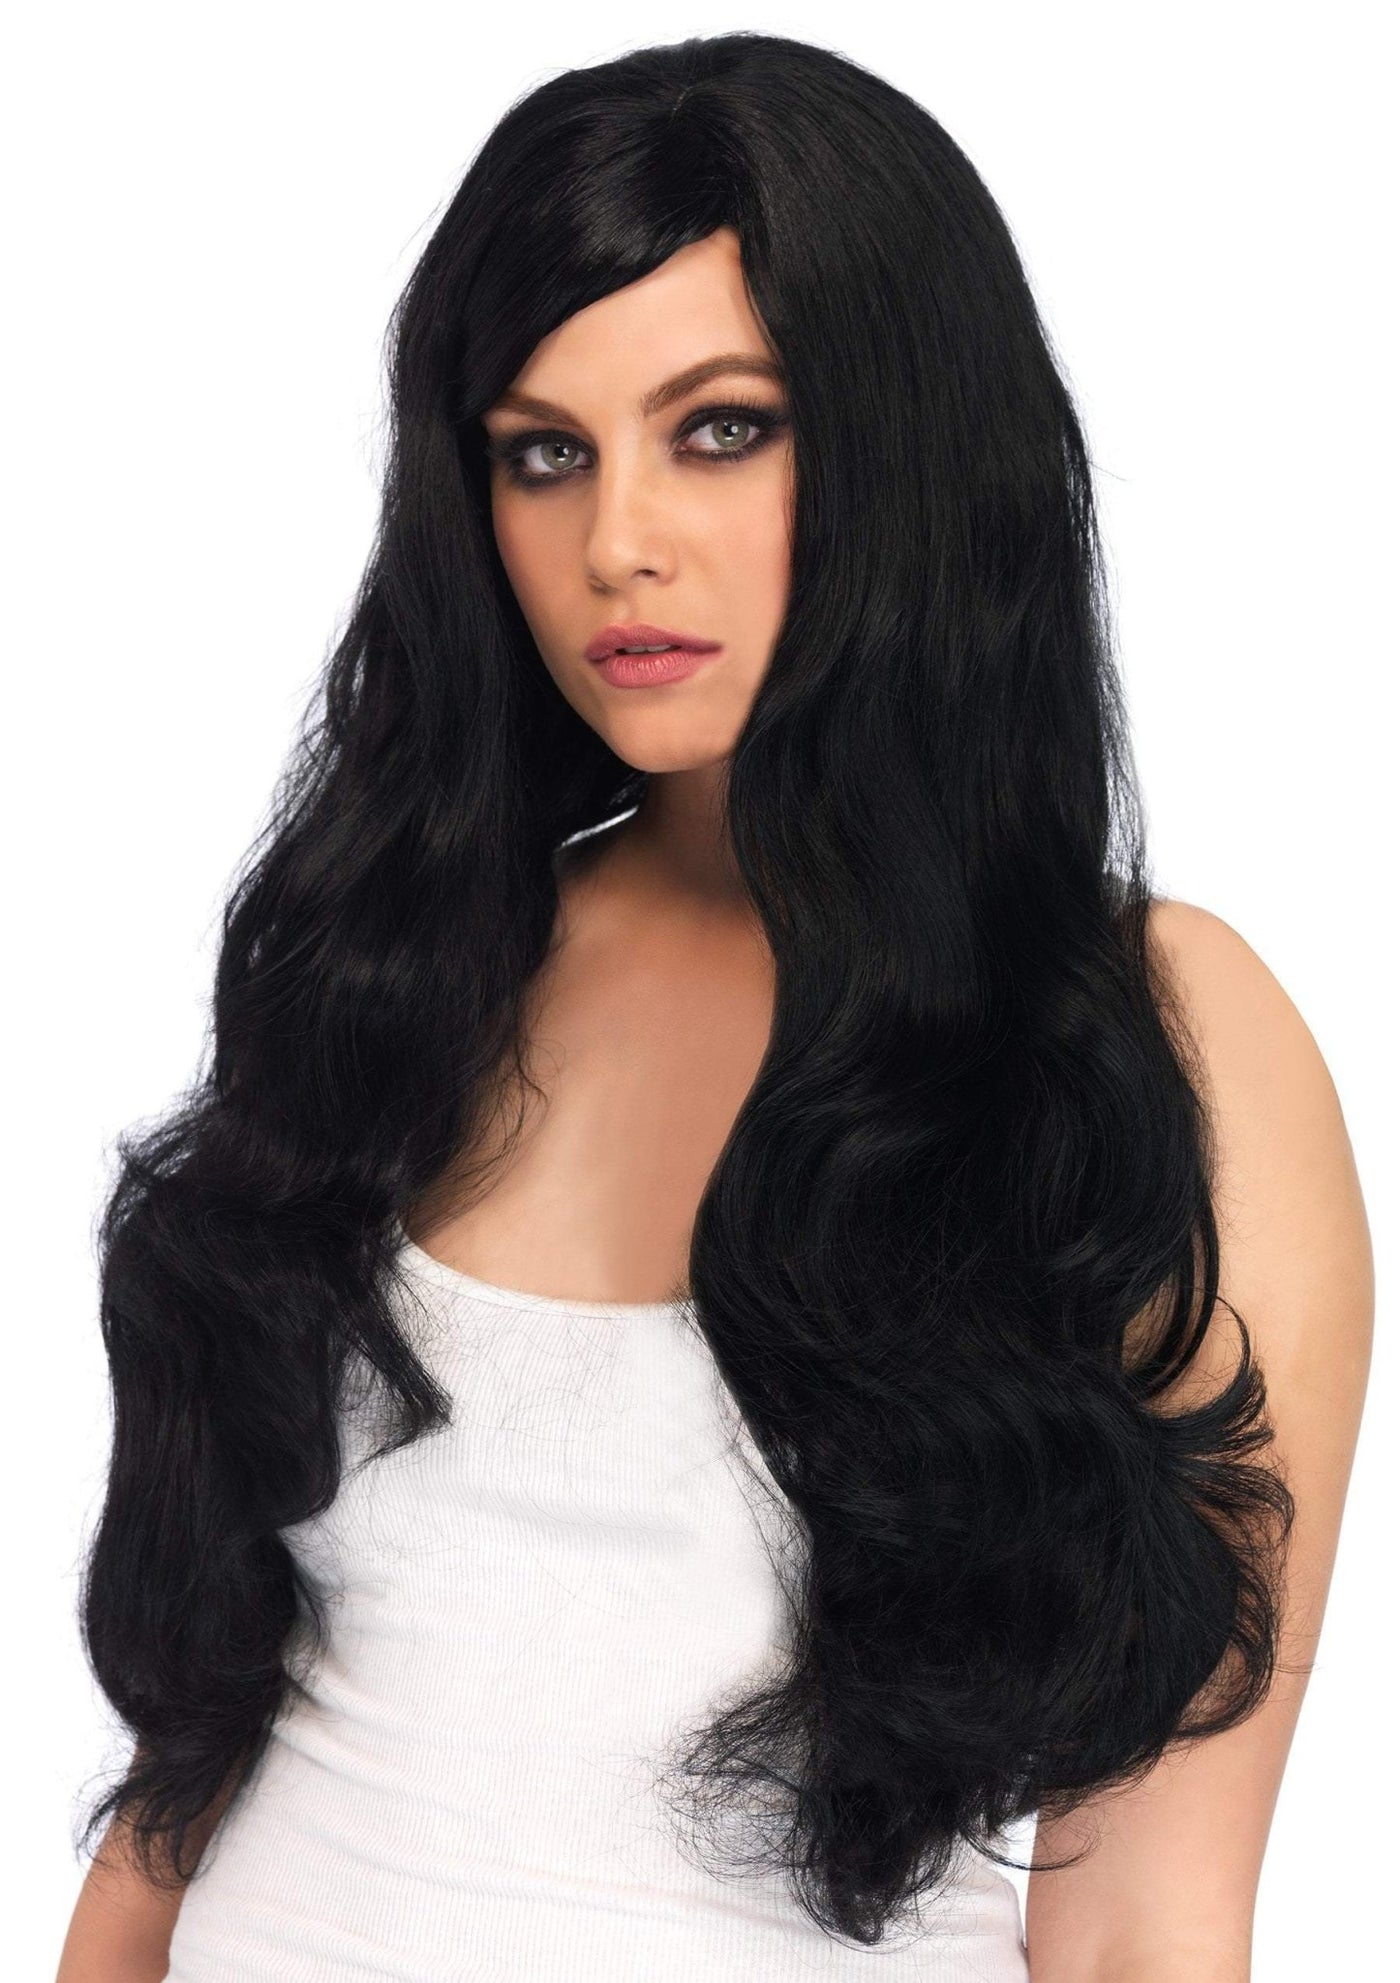 Sexy Long Wavy Wig LEG-A2722 RED - JJ's Party House